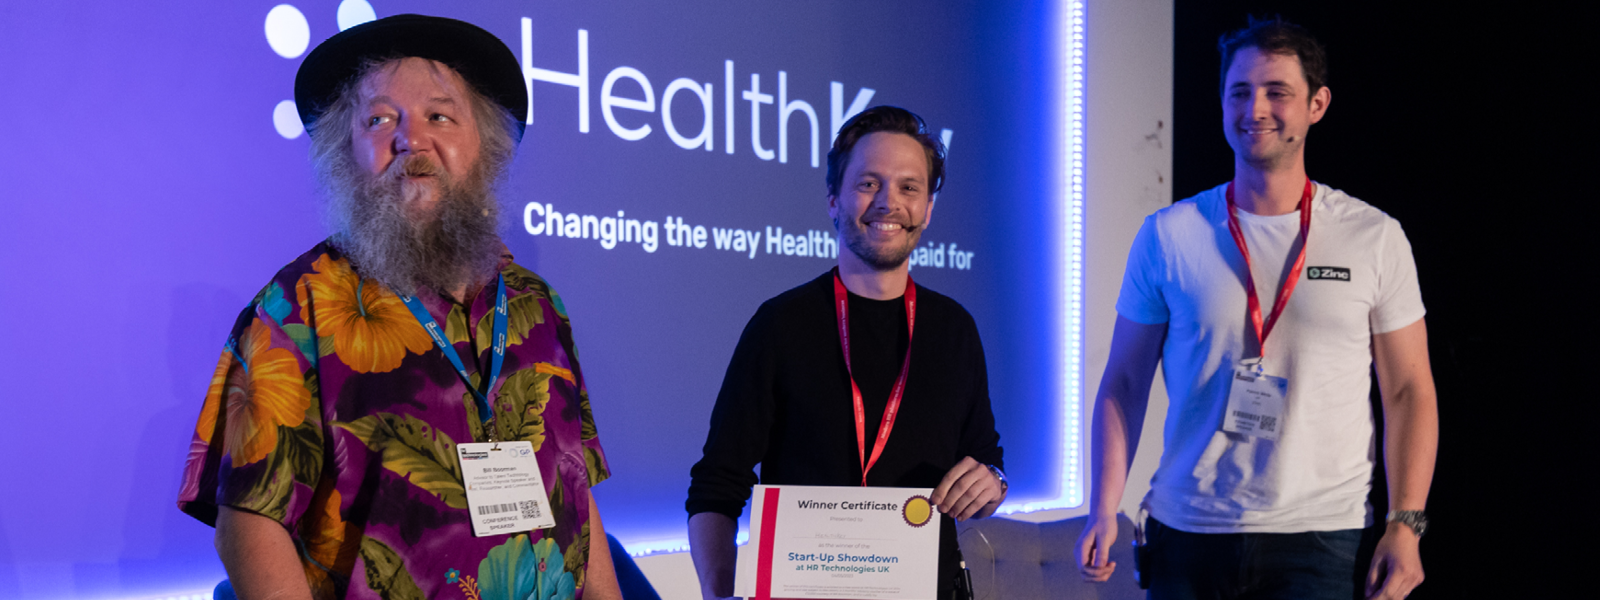 Congratulations to HealthKey, the winner of the 2023 Start-Up Showdown!